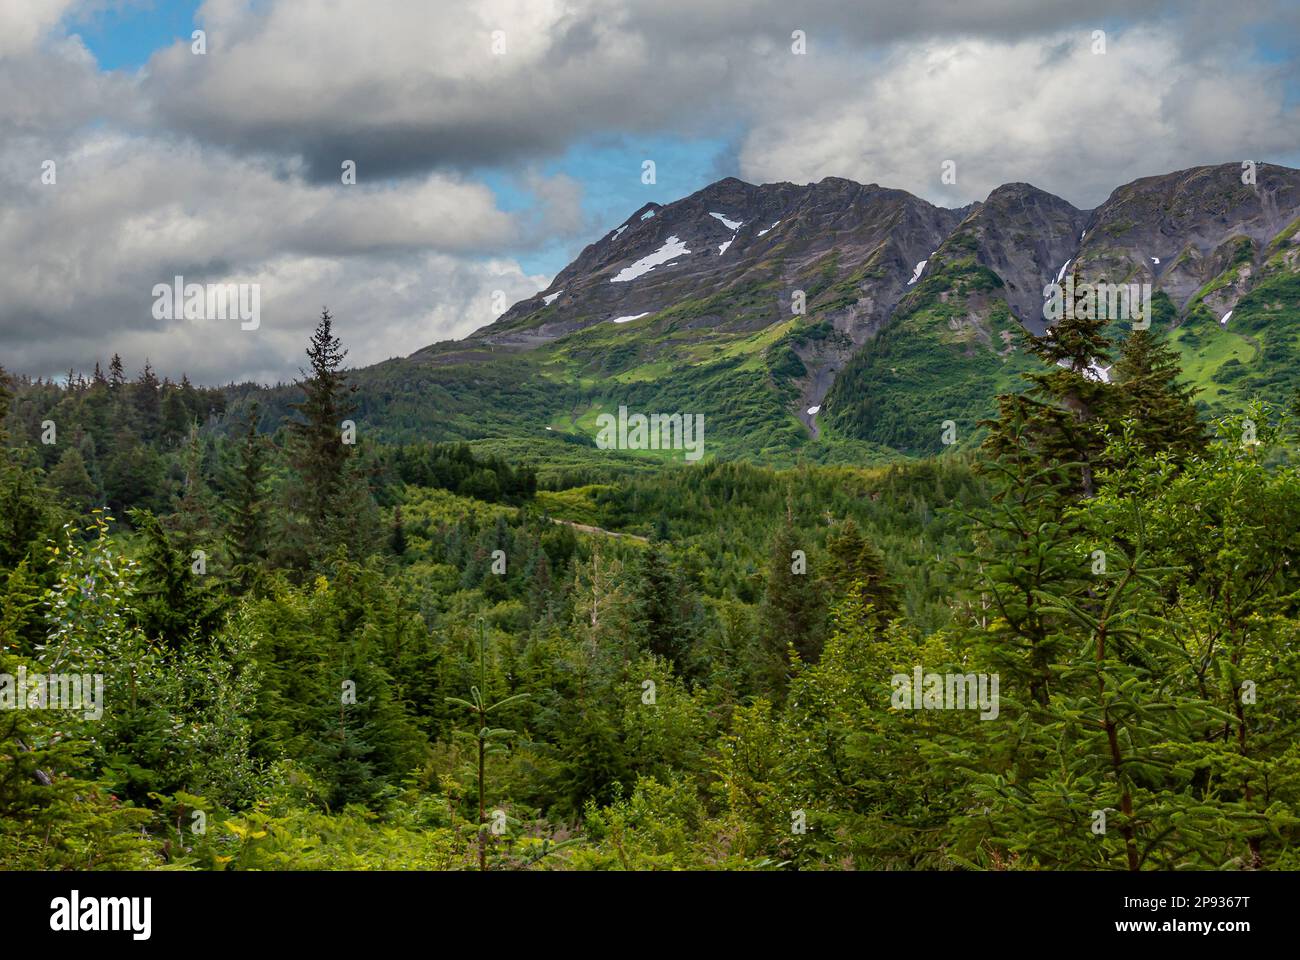 Girdwood Alaska, USA - July 23, 2011: Chugach Park. Thick green forest fronts gray mountain with snow patches under blue coudscape Stock Photo